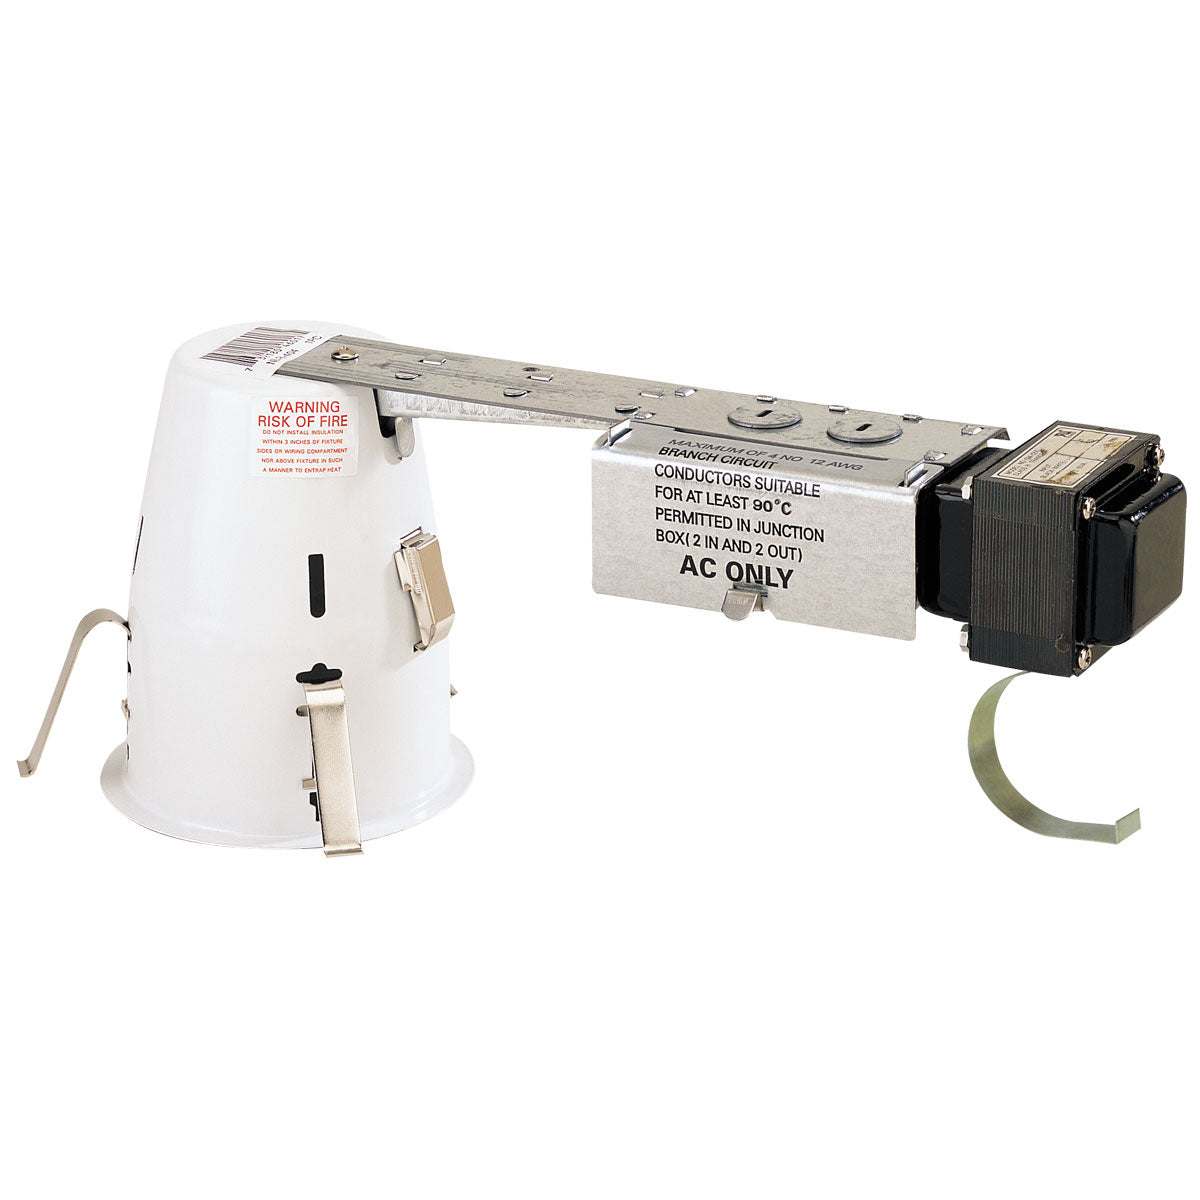 Nora Lighting NLR-404QAT/8 - Recessed - 4 Inch AT Low Voltage Housing, 120V/12V Mag. Transformer, Rated for 8W